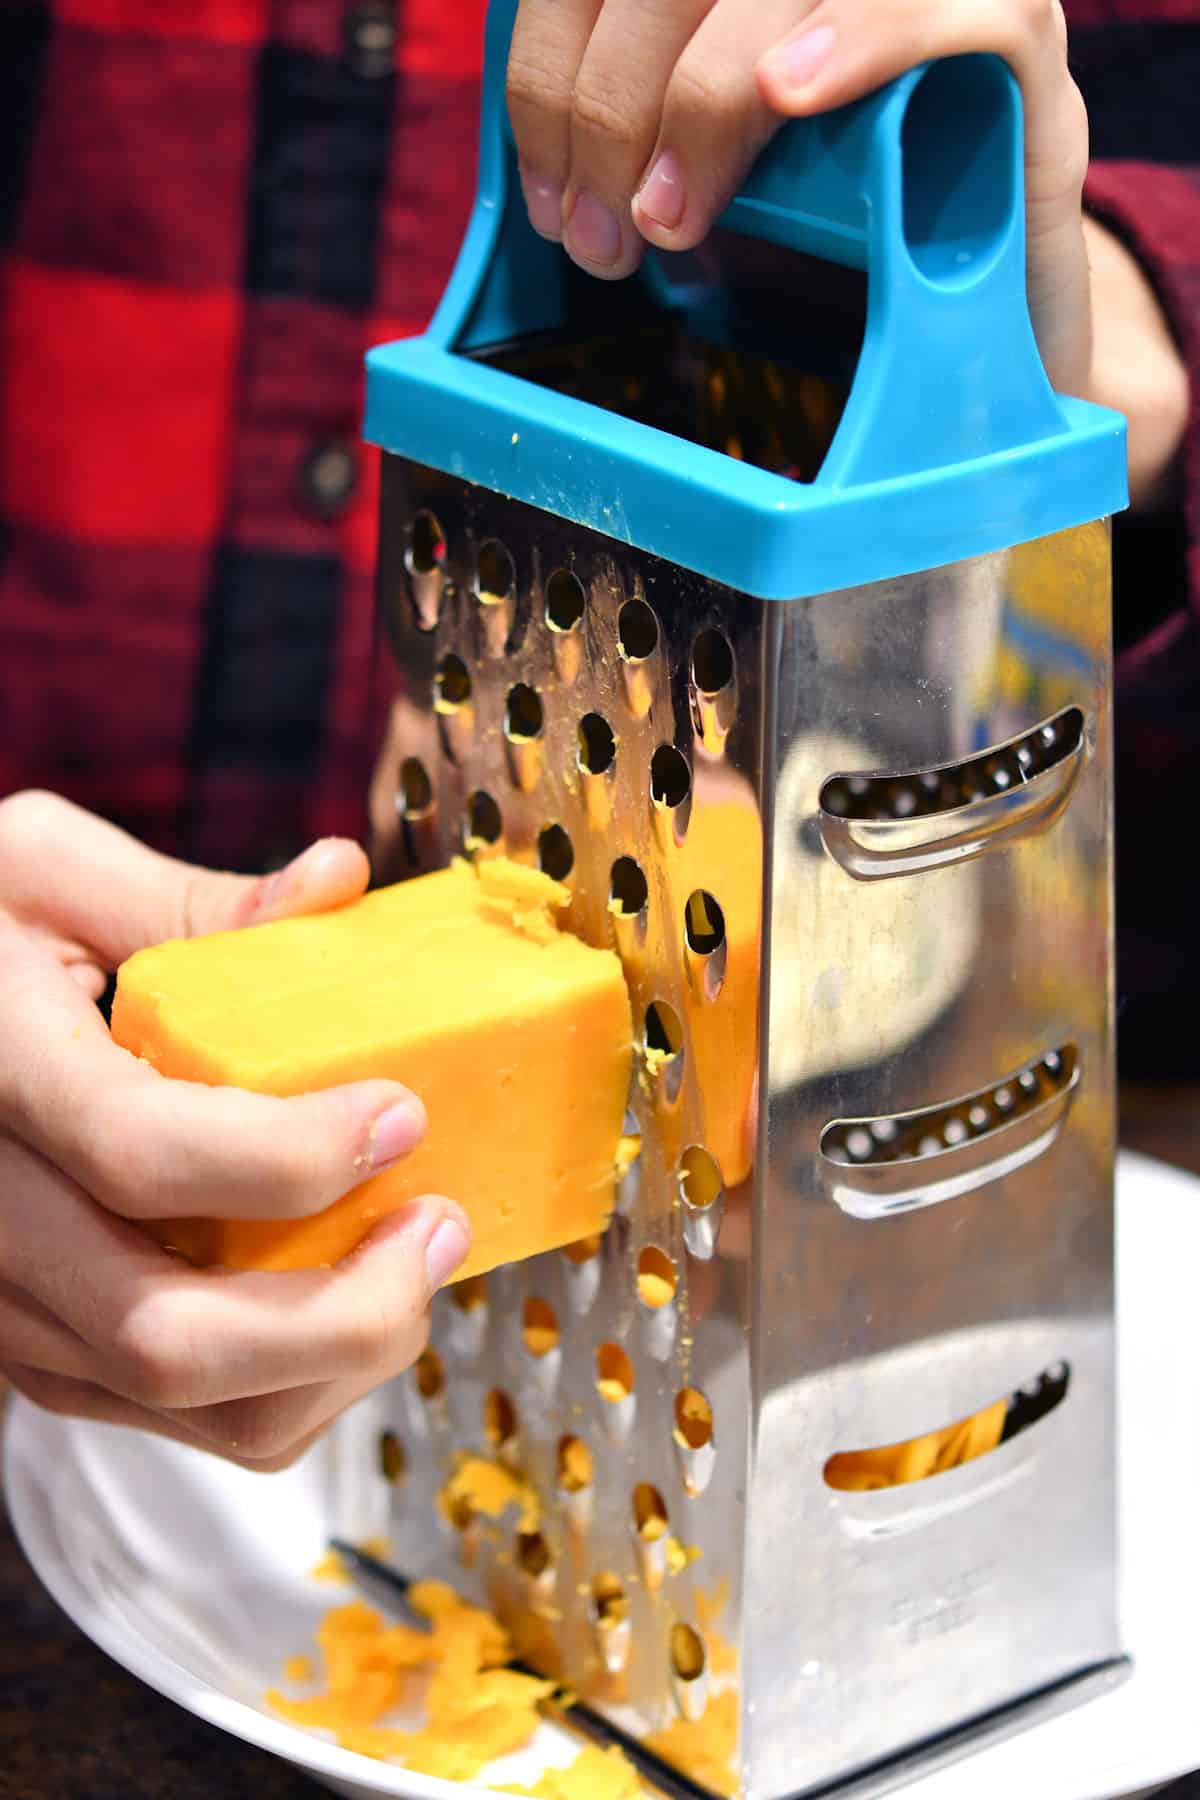 shredding cheddar cheese with a box grater